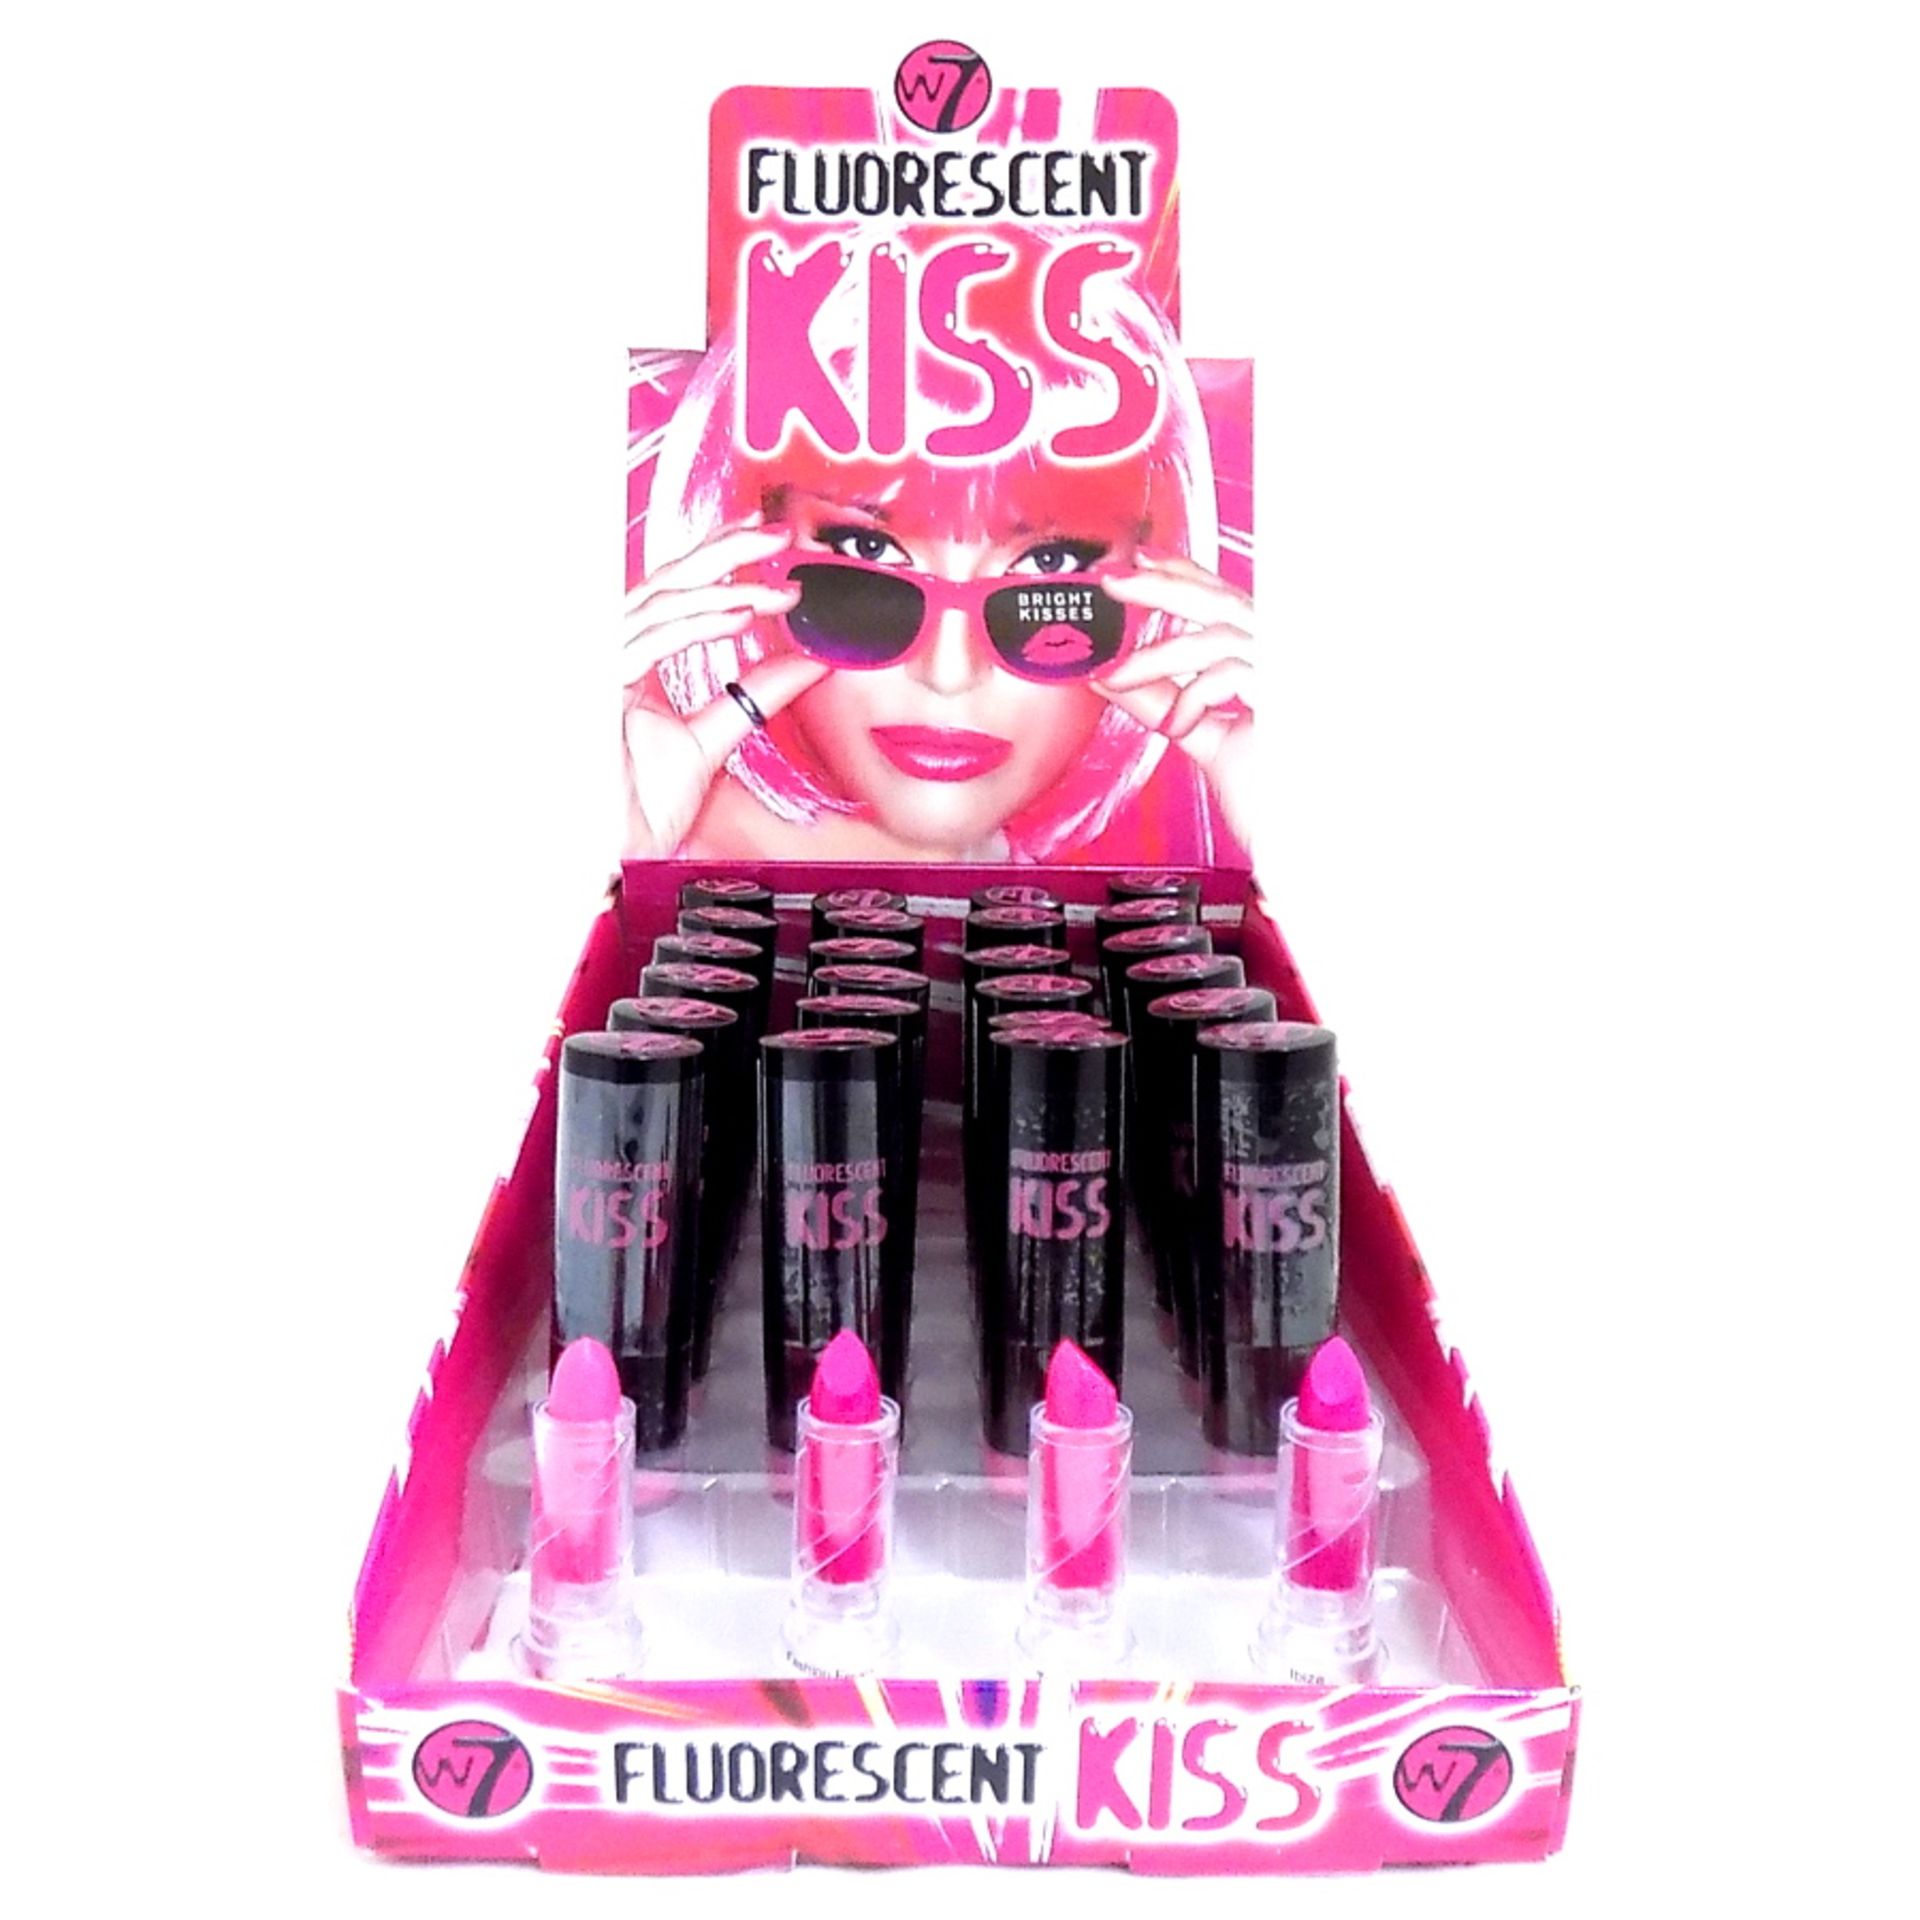 192 W7 Fluorescent Kiss Lipstick – in Retail Displays – 4 Shades   NO VAT – UK Delivery £15